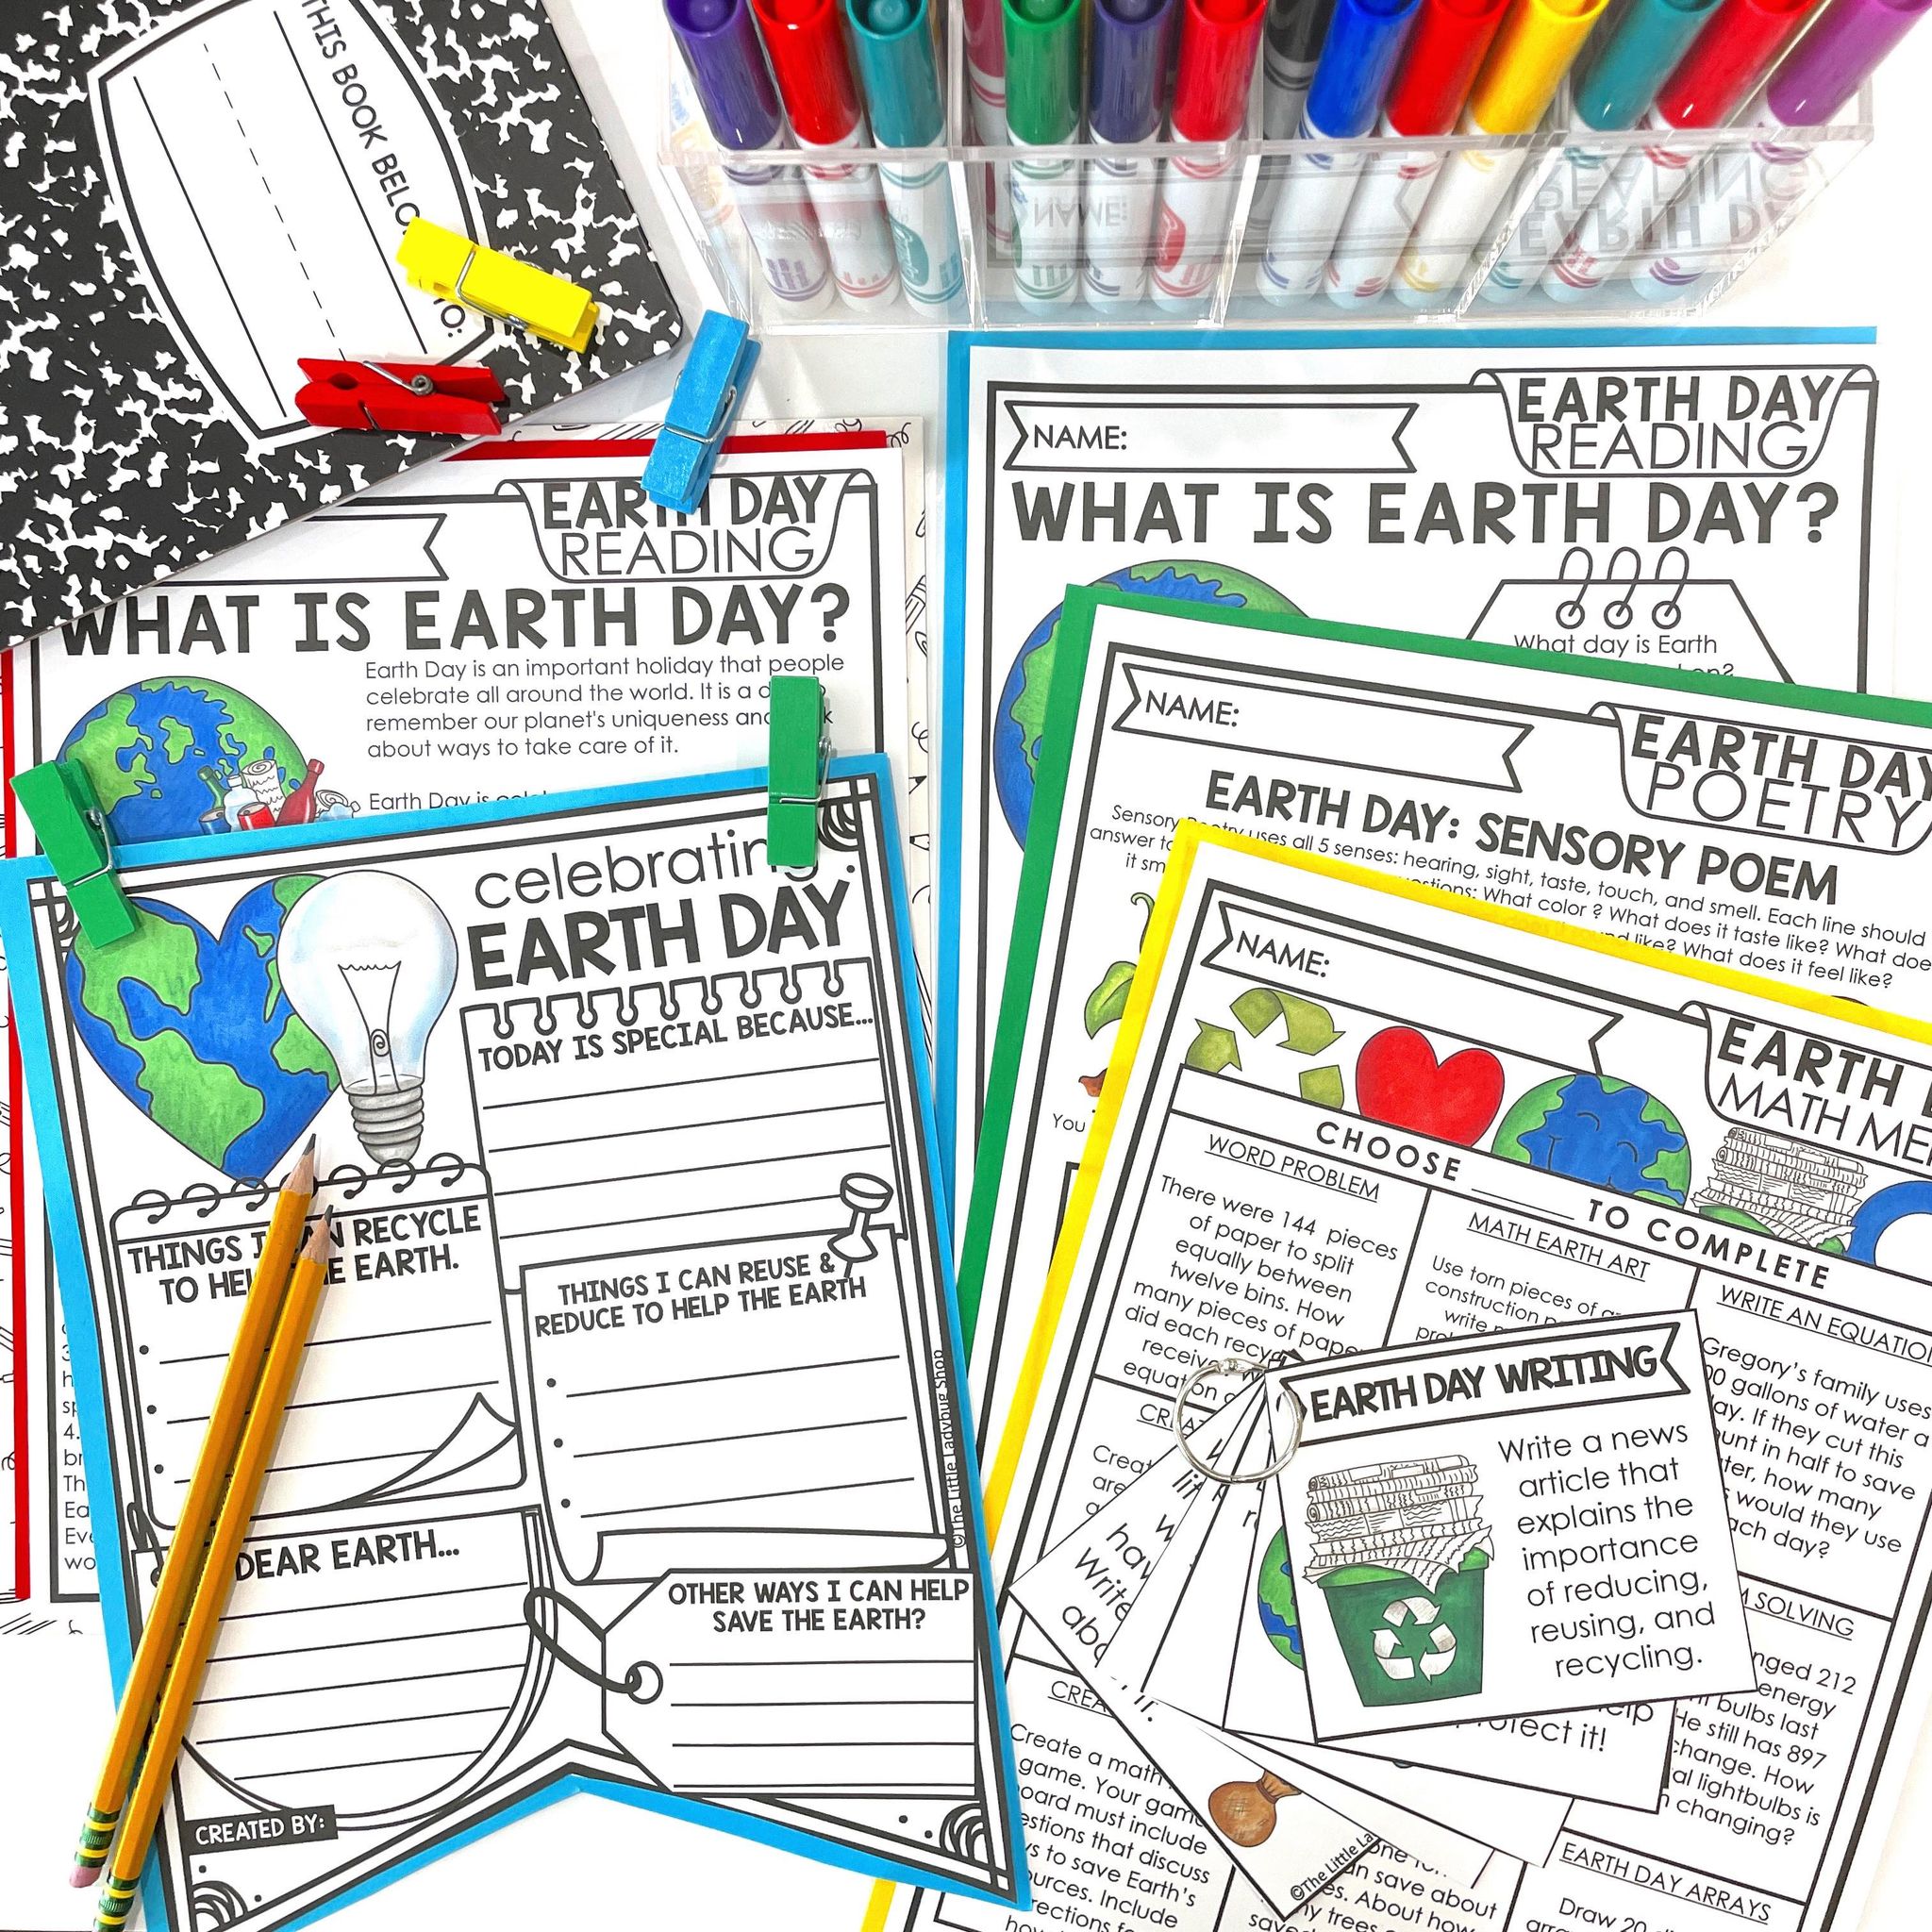 Earth Day Reading and Writing Ideas for Upper Elementary